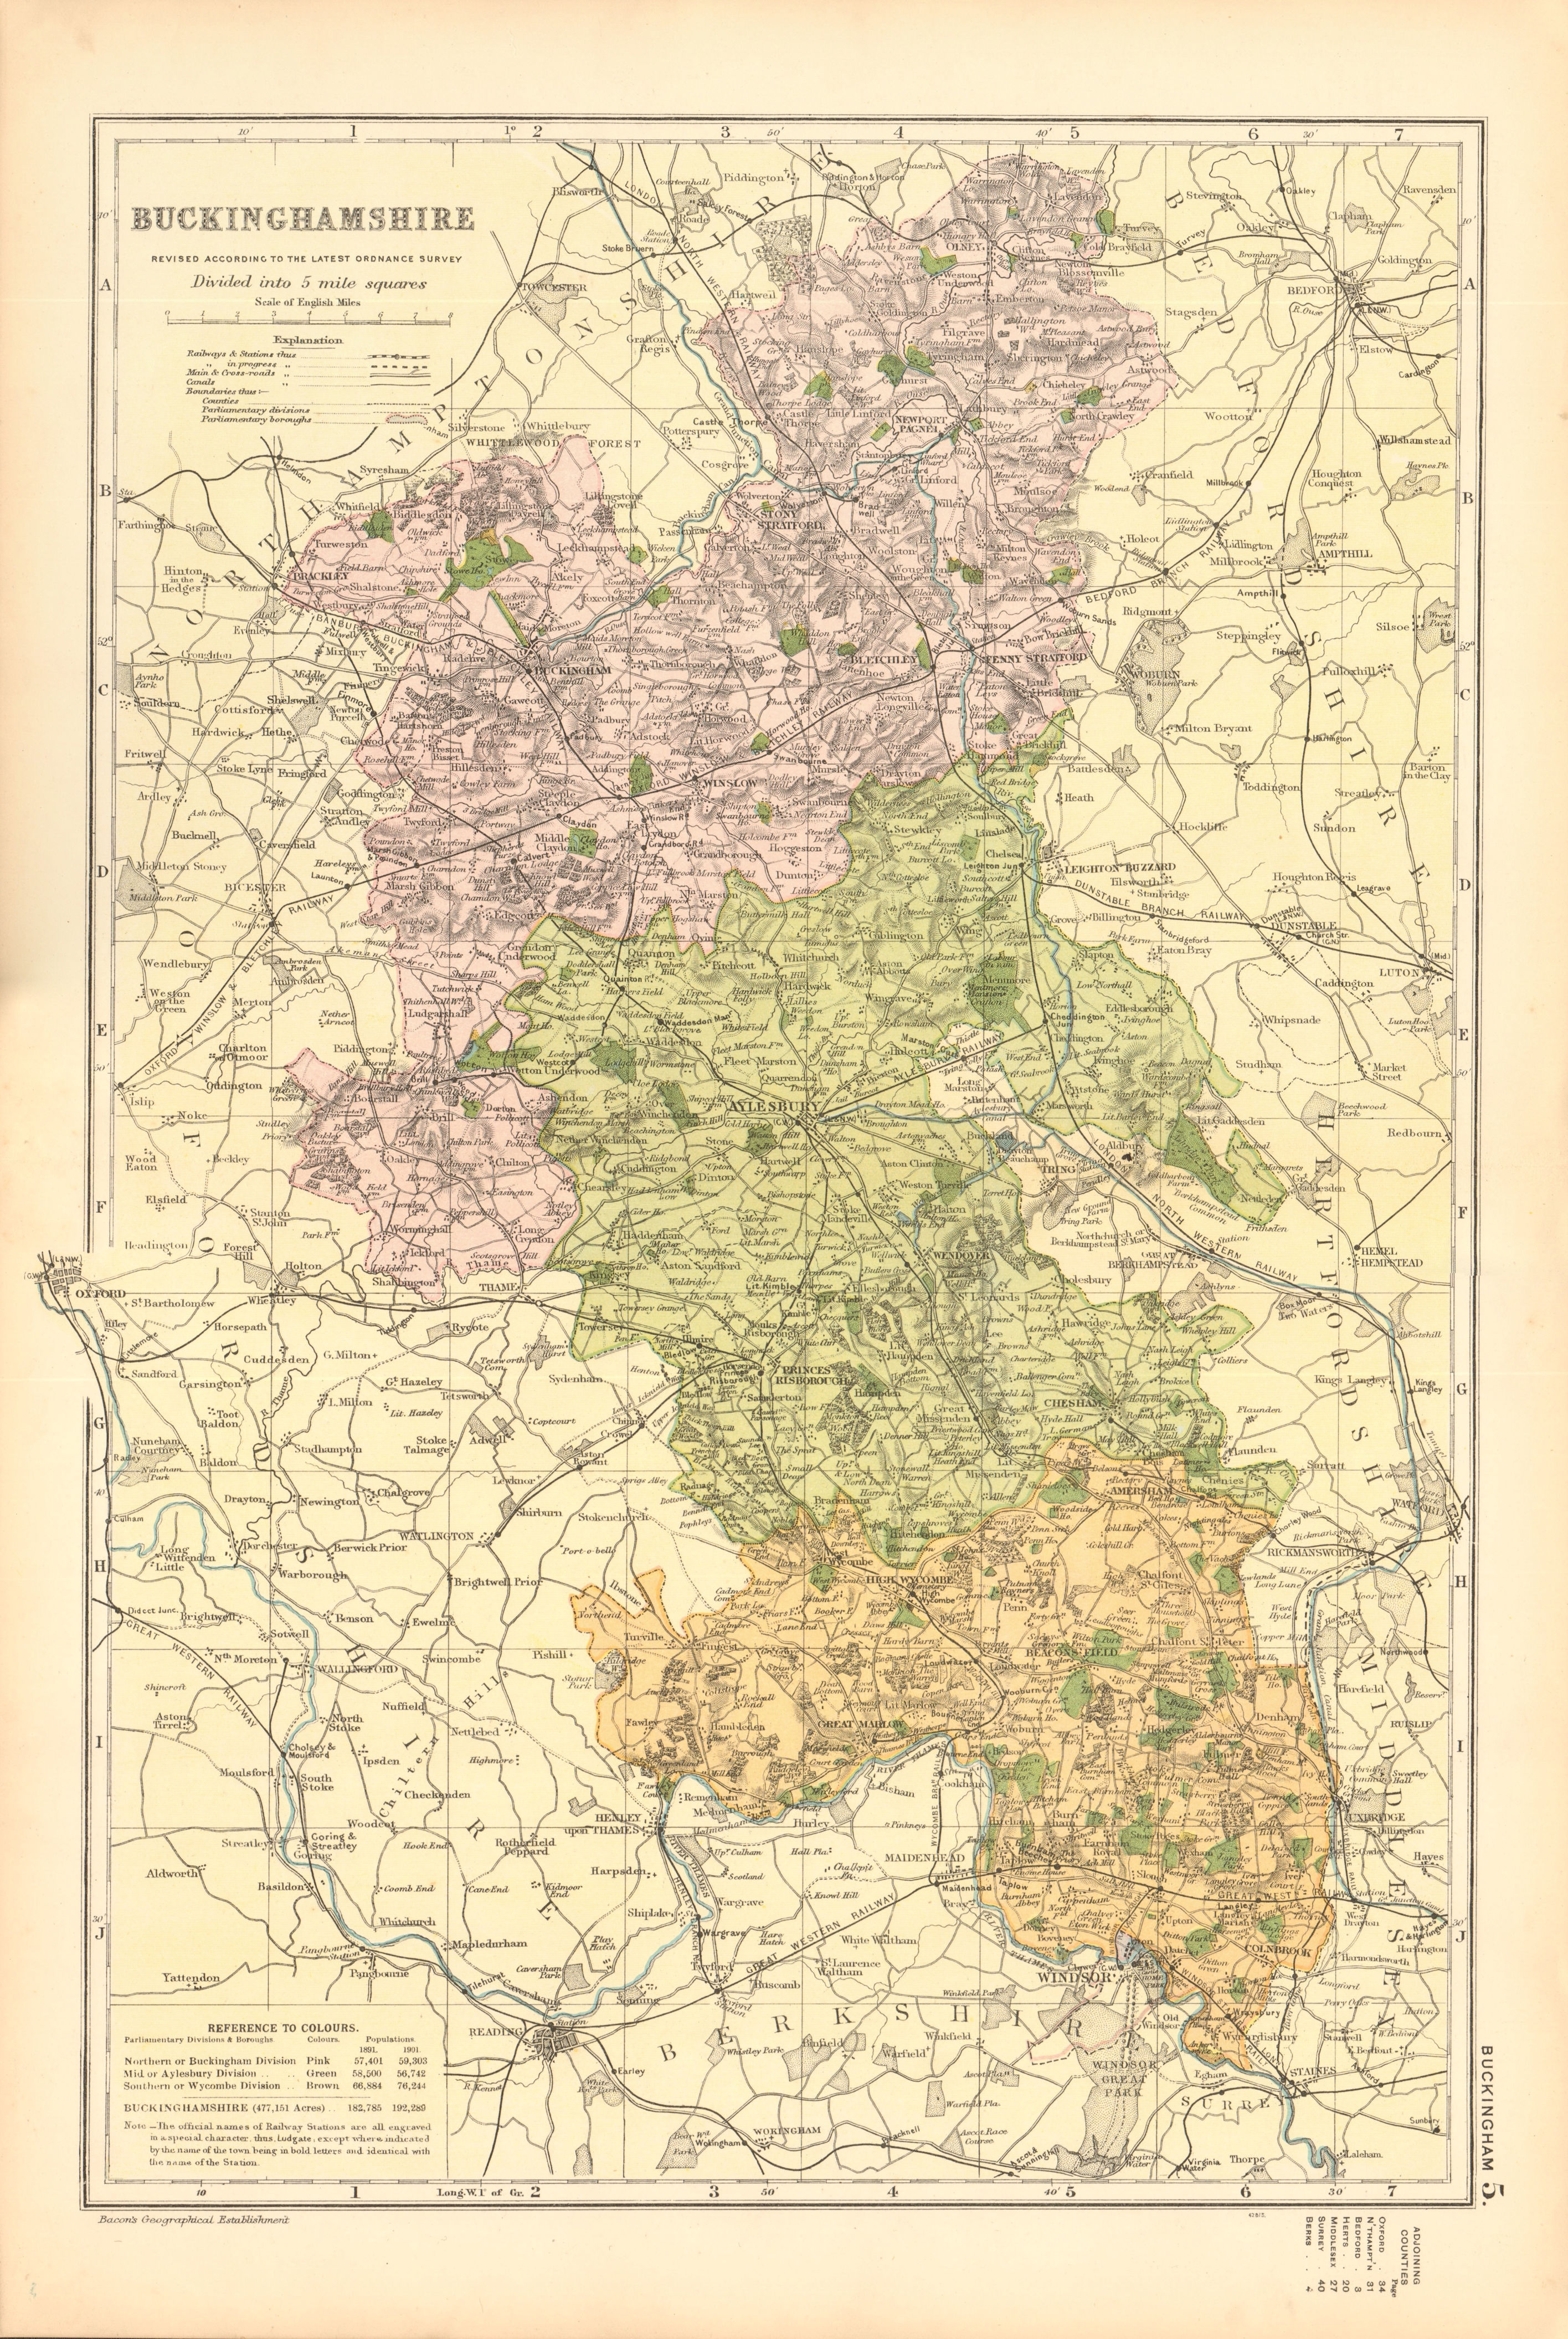 Associate Product BUCKINGHAMSHIRE. Showing Parliamentary divisions,boroughs & parks.BACON 1904 map